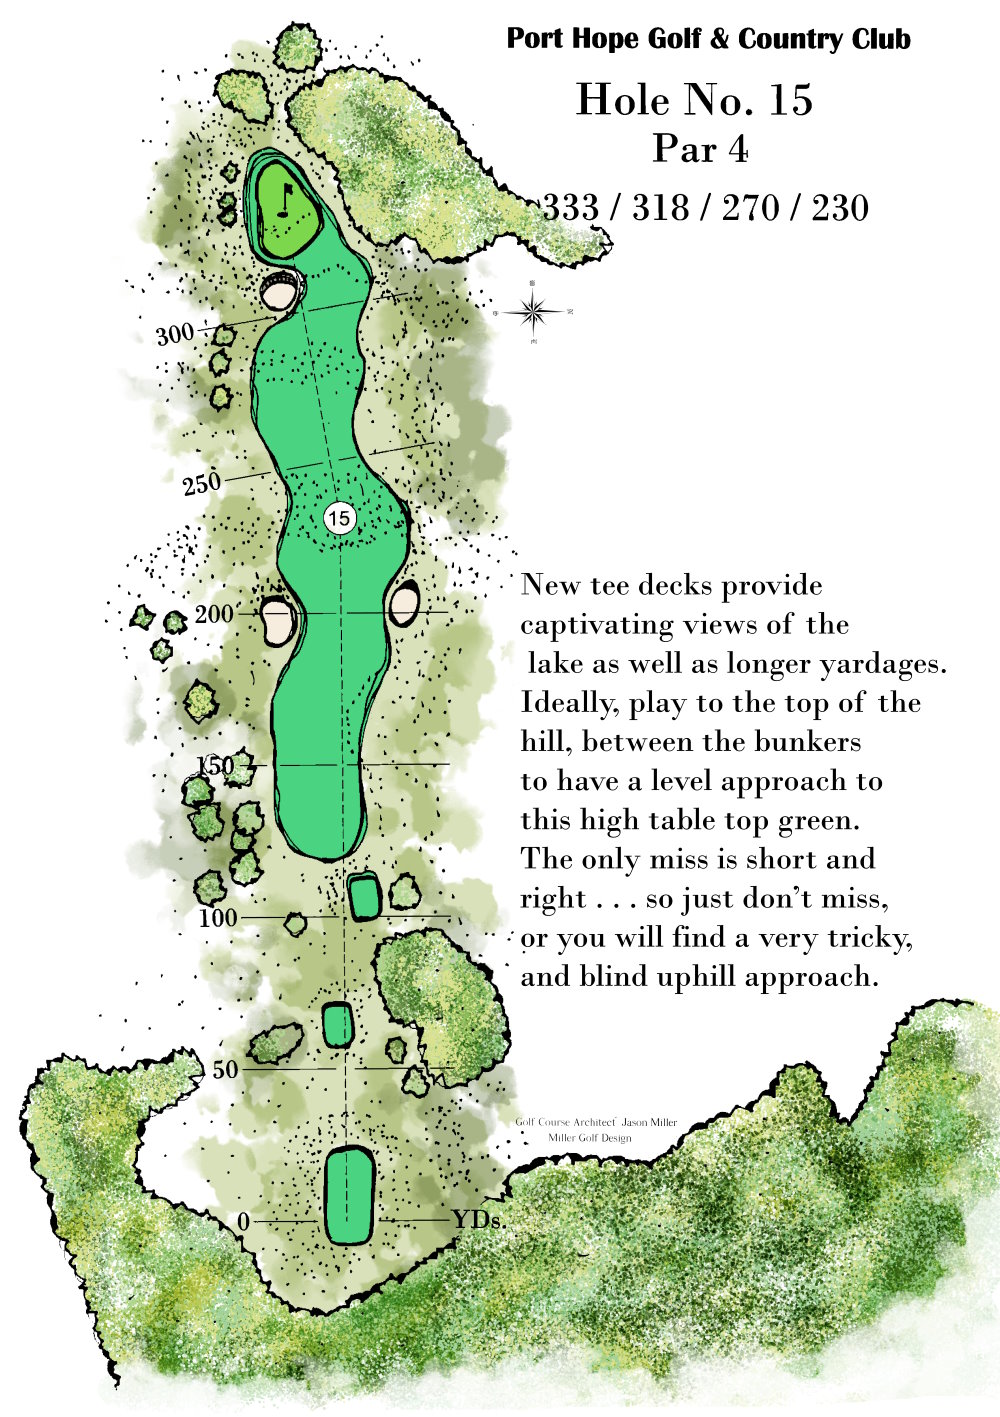 Rendering of Hole 15